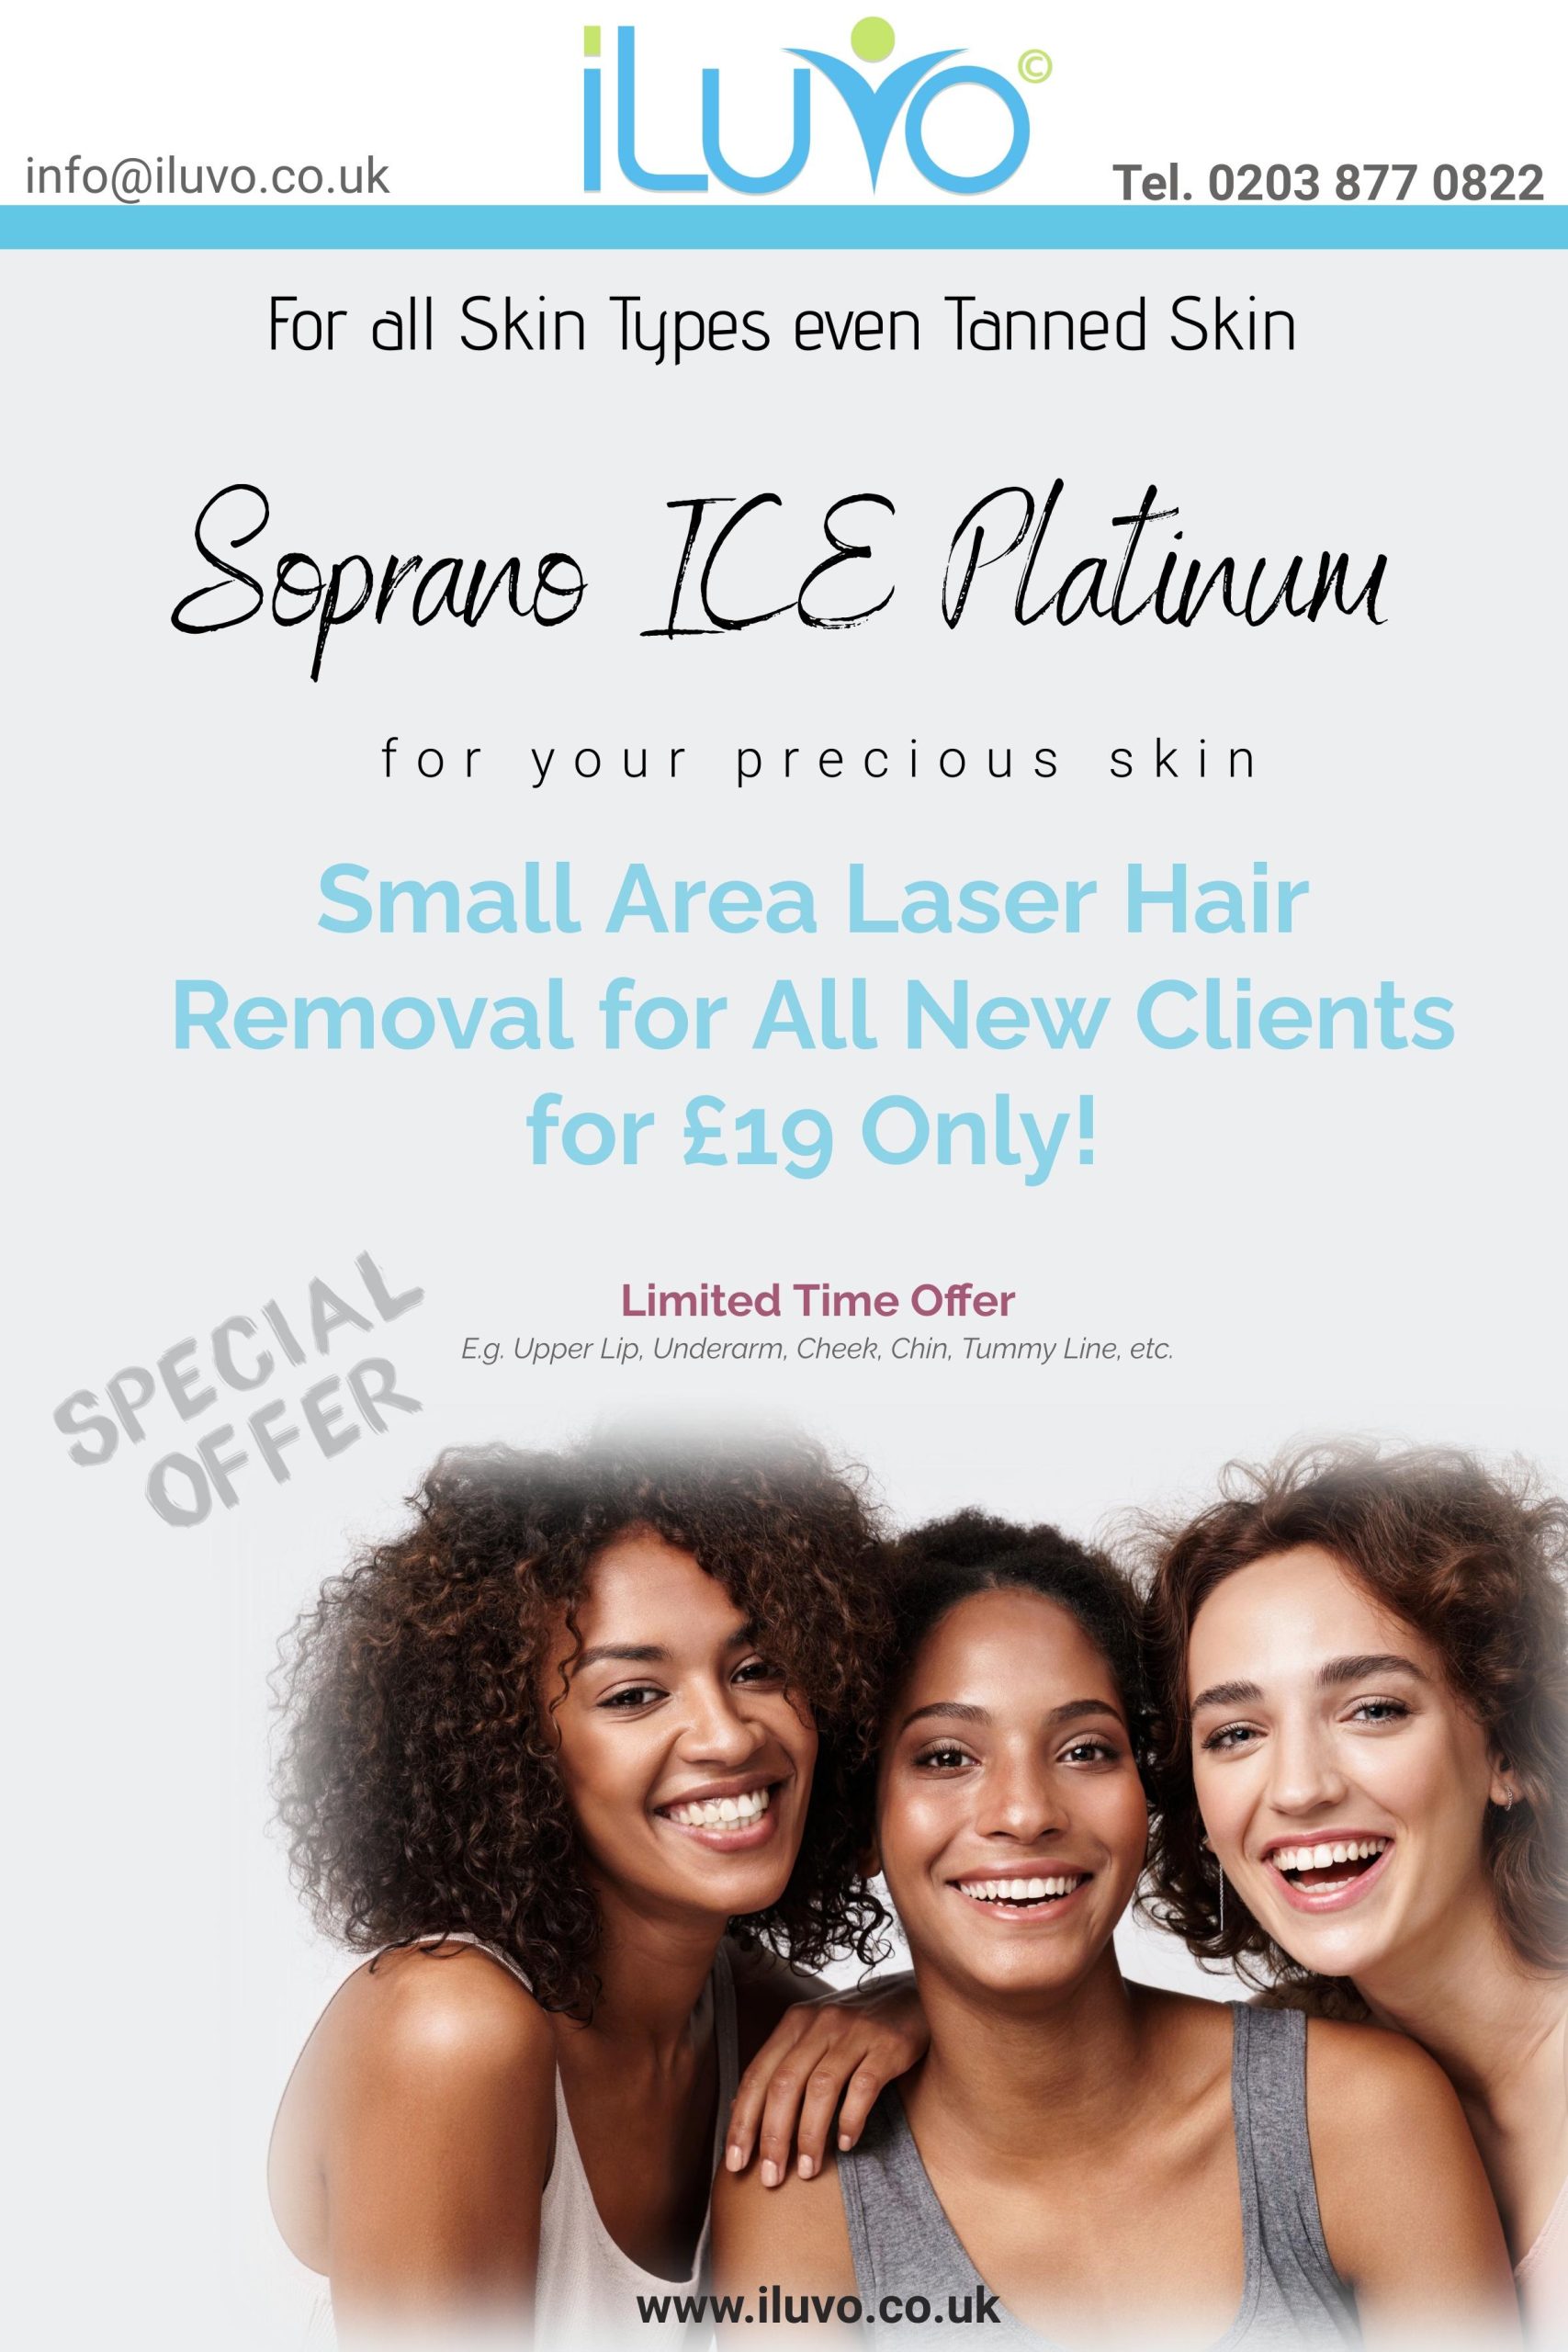 iLuvo Beauty Special Offer discount marketing poster for multi-ethnic skin tone laser hair removal technology with soprano ICE Platinum. 